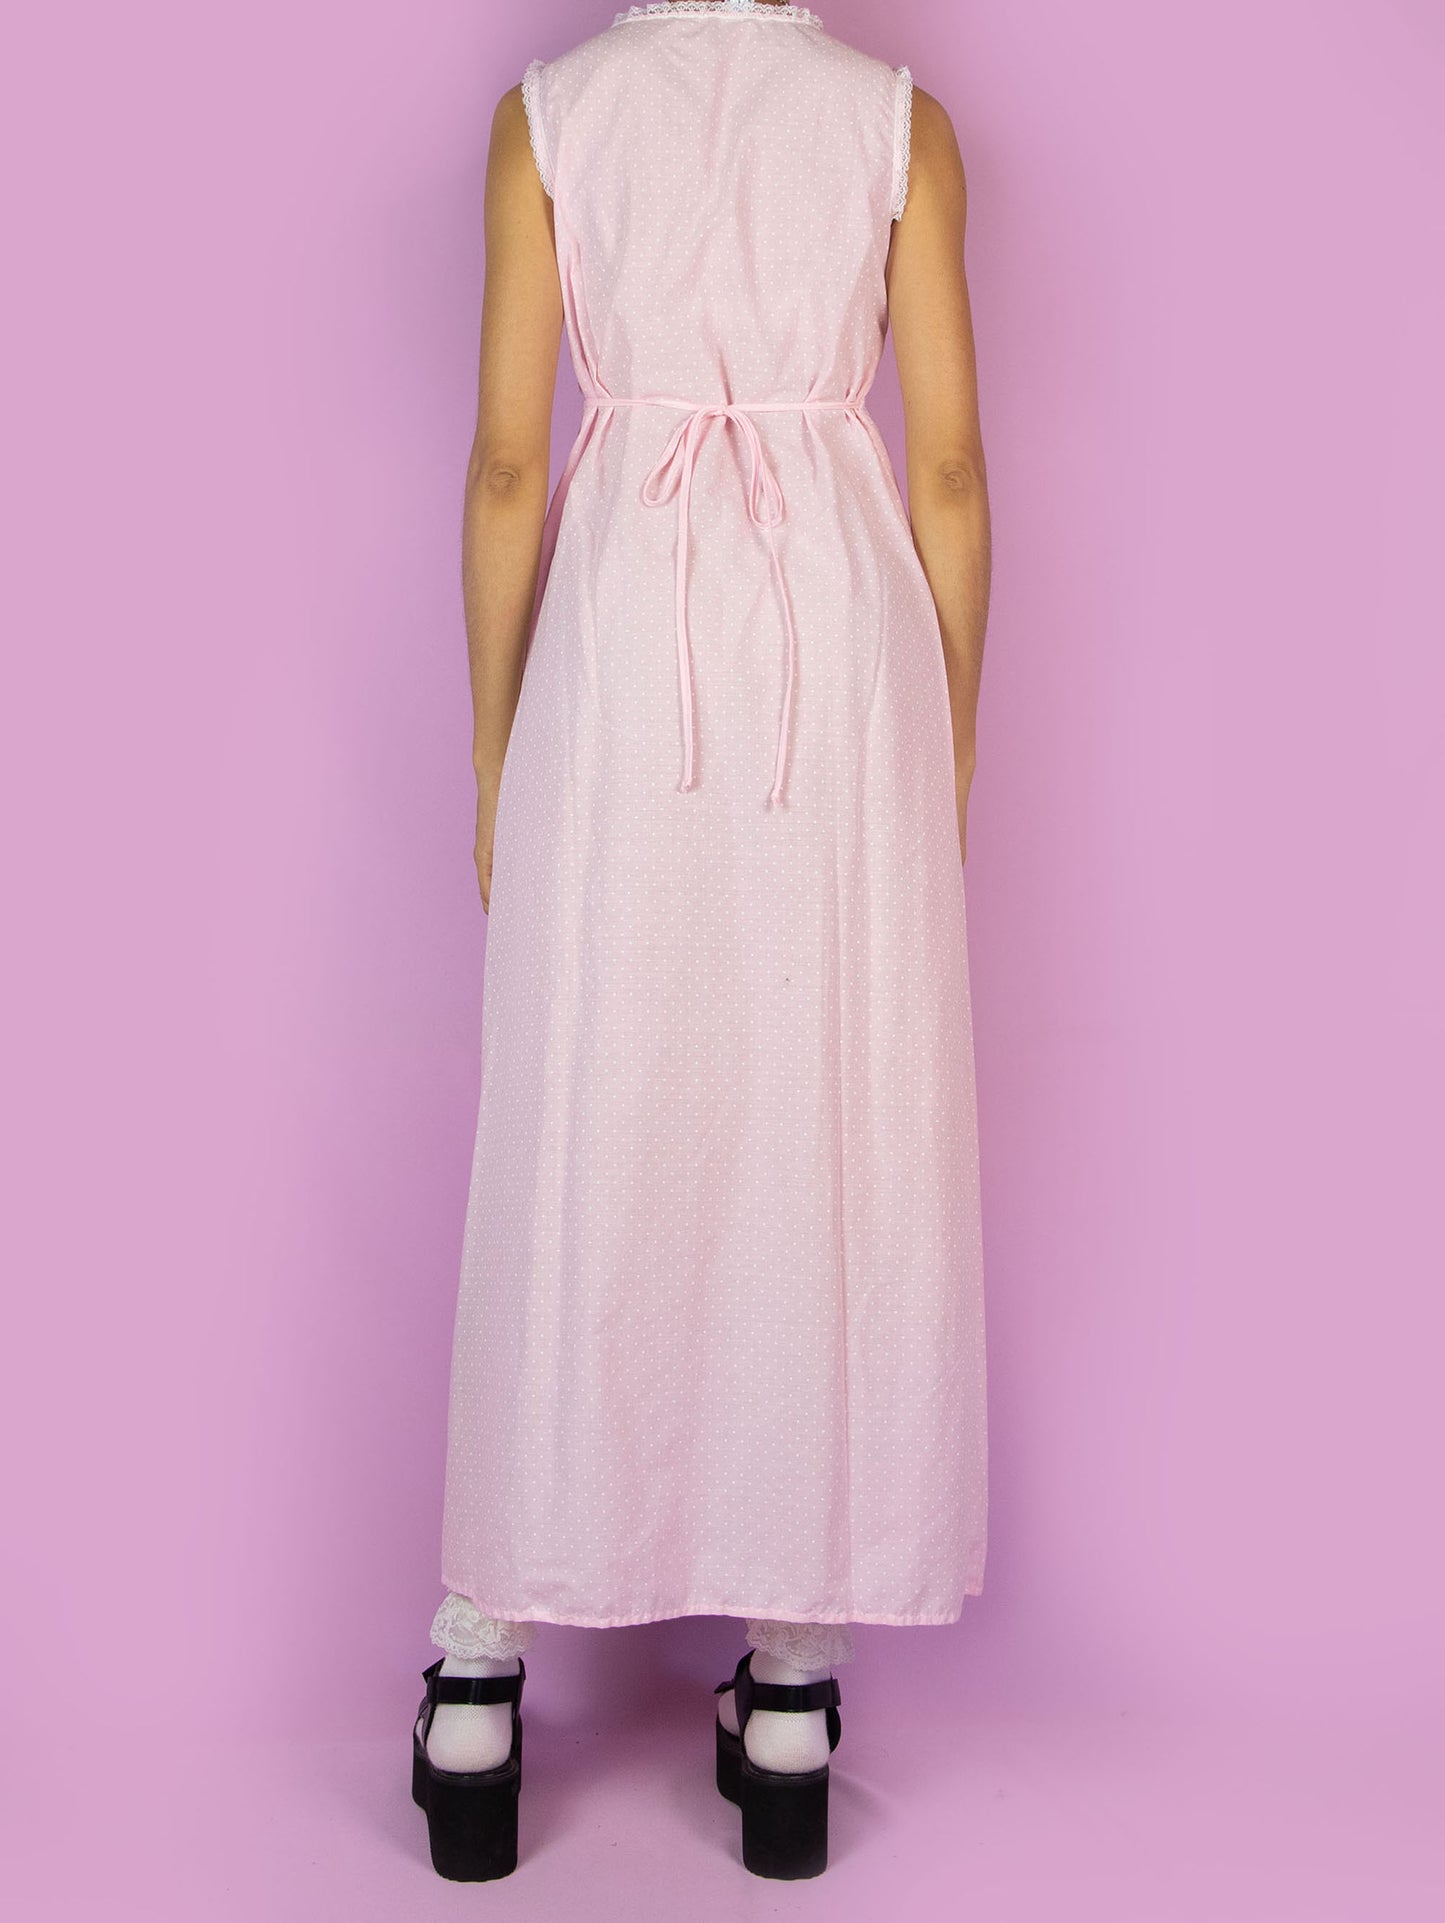 The Vintage 90s Pink Slip Maxi Dress is a light pastel pink polka dot midi dress featuring white lace details and ties at the back. Romantic 1990s night dress.